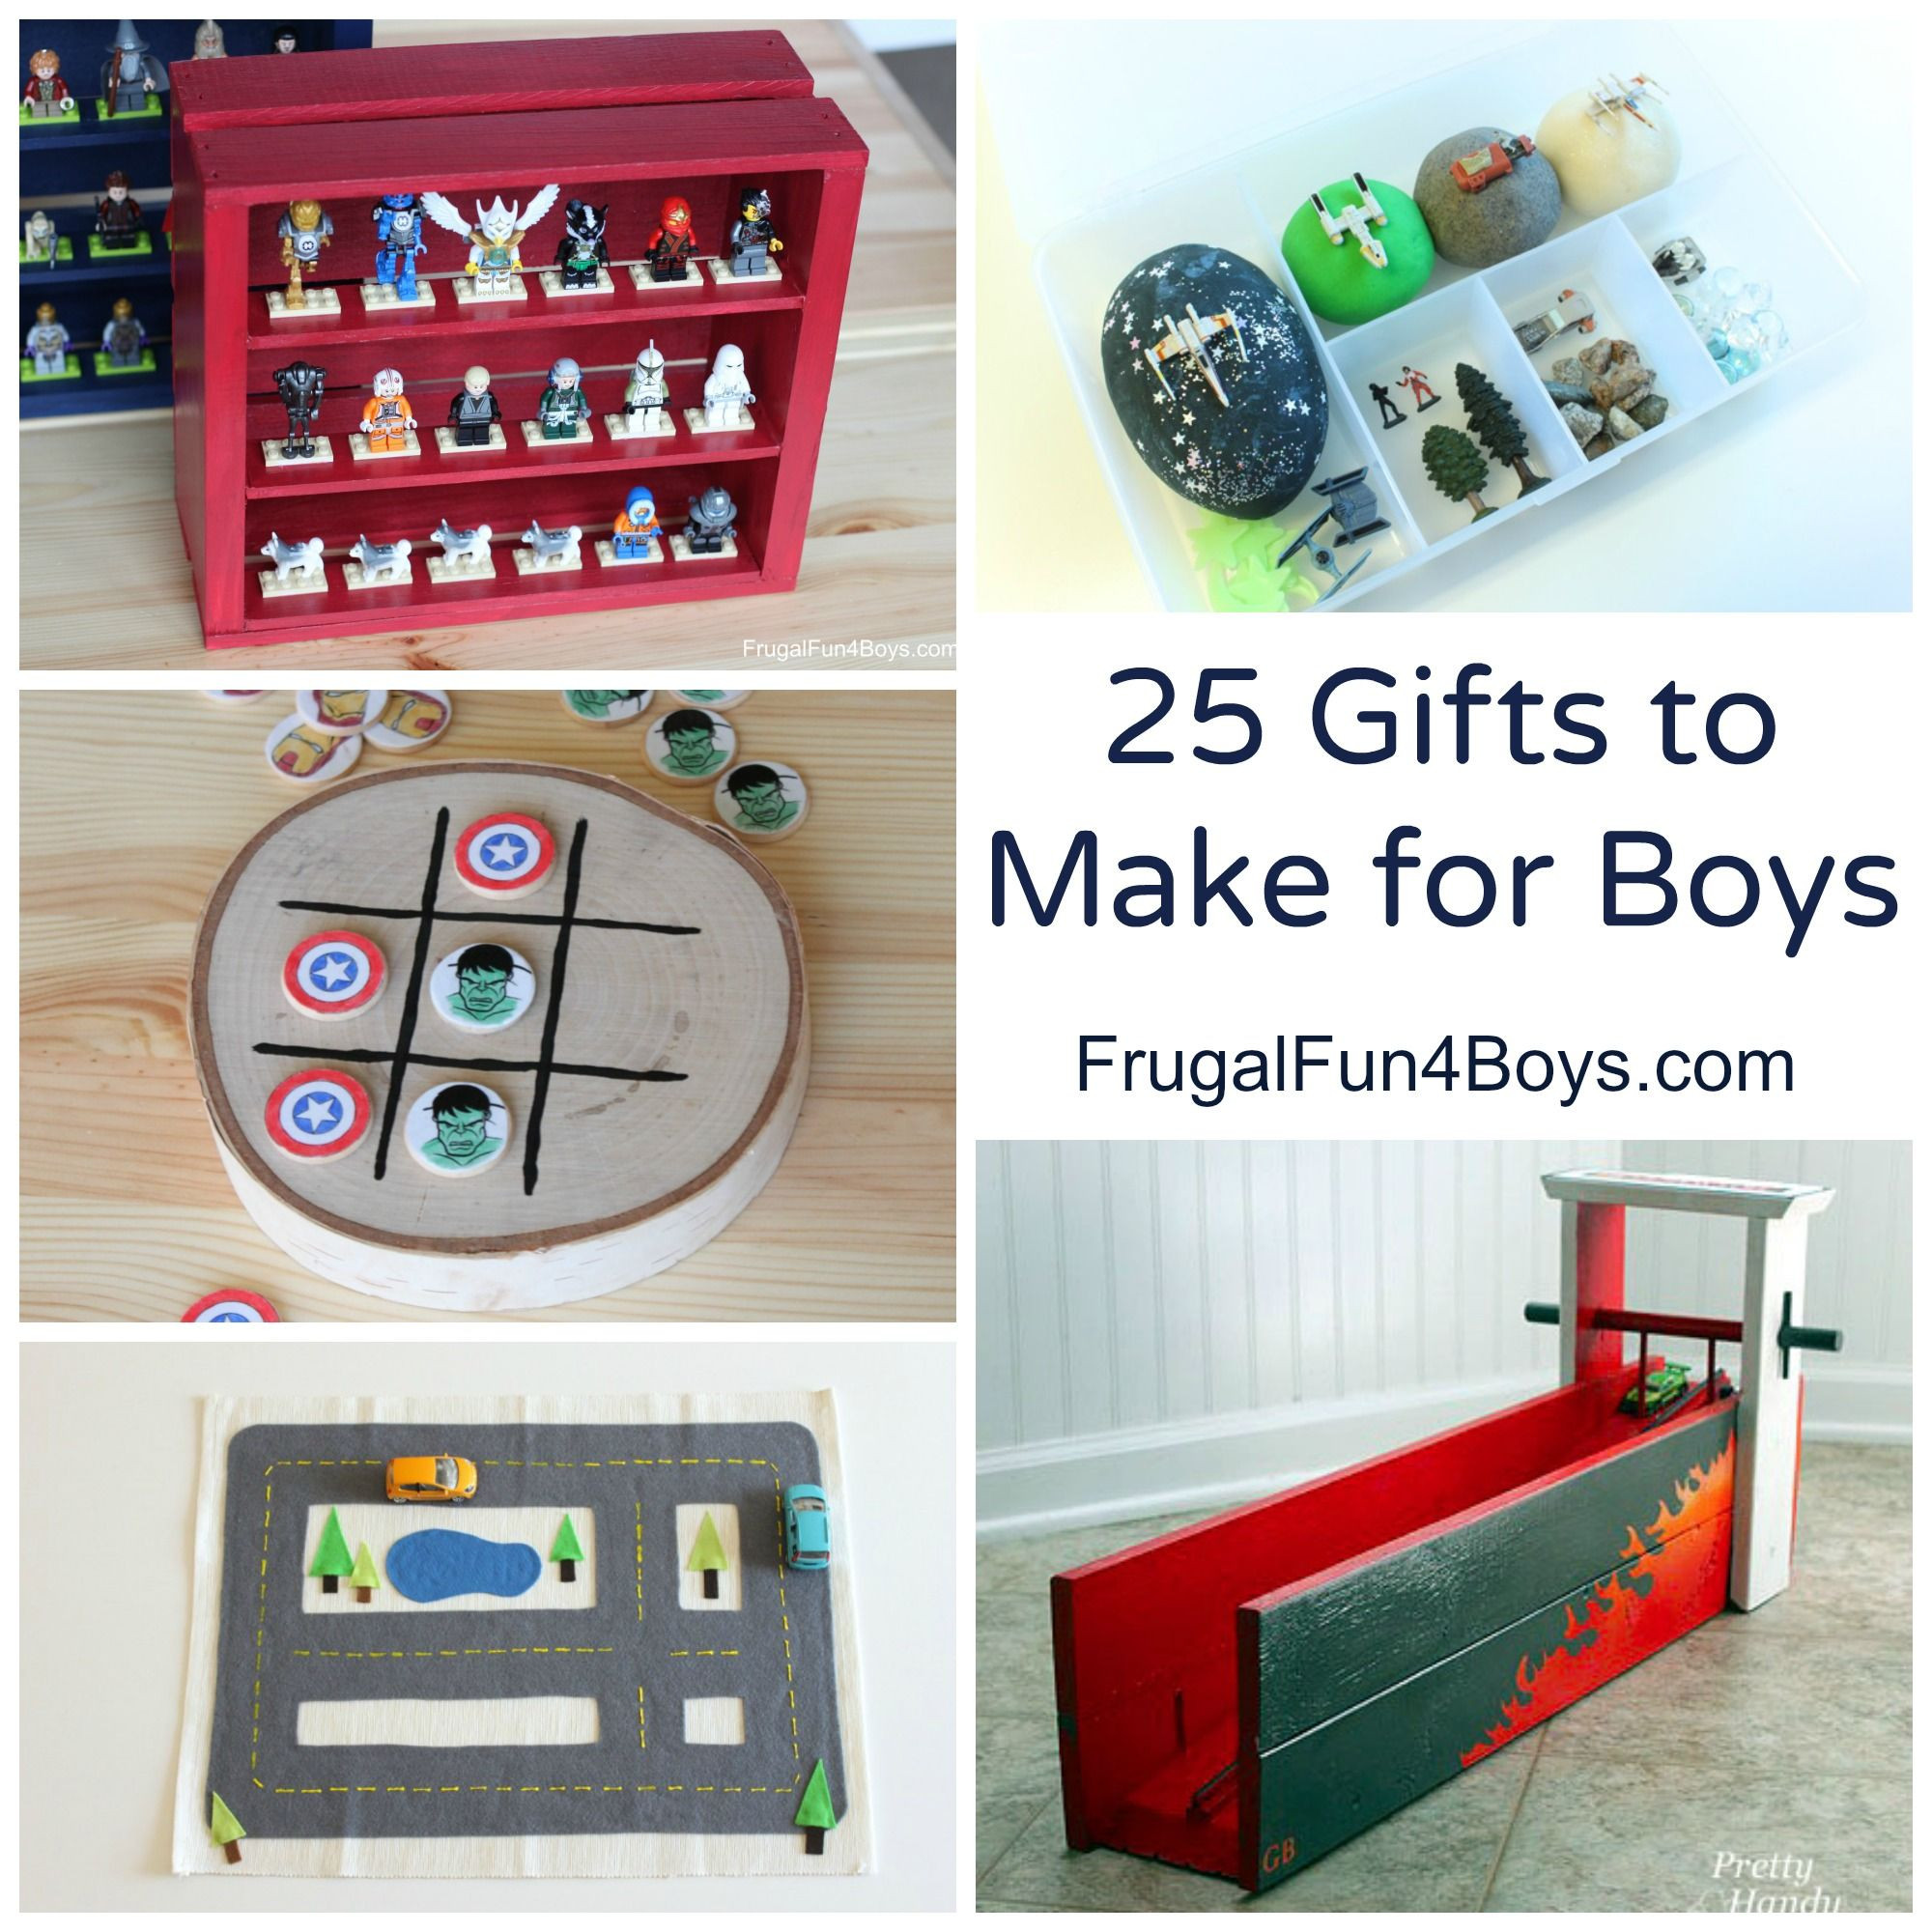 DIY Christmas Gifts For Boy
 25 More Homemade Gifts to Make for Boys